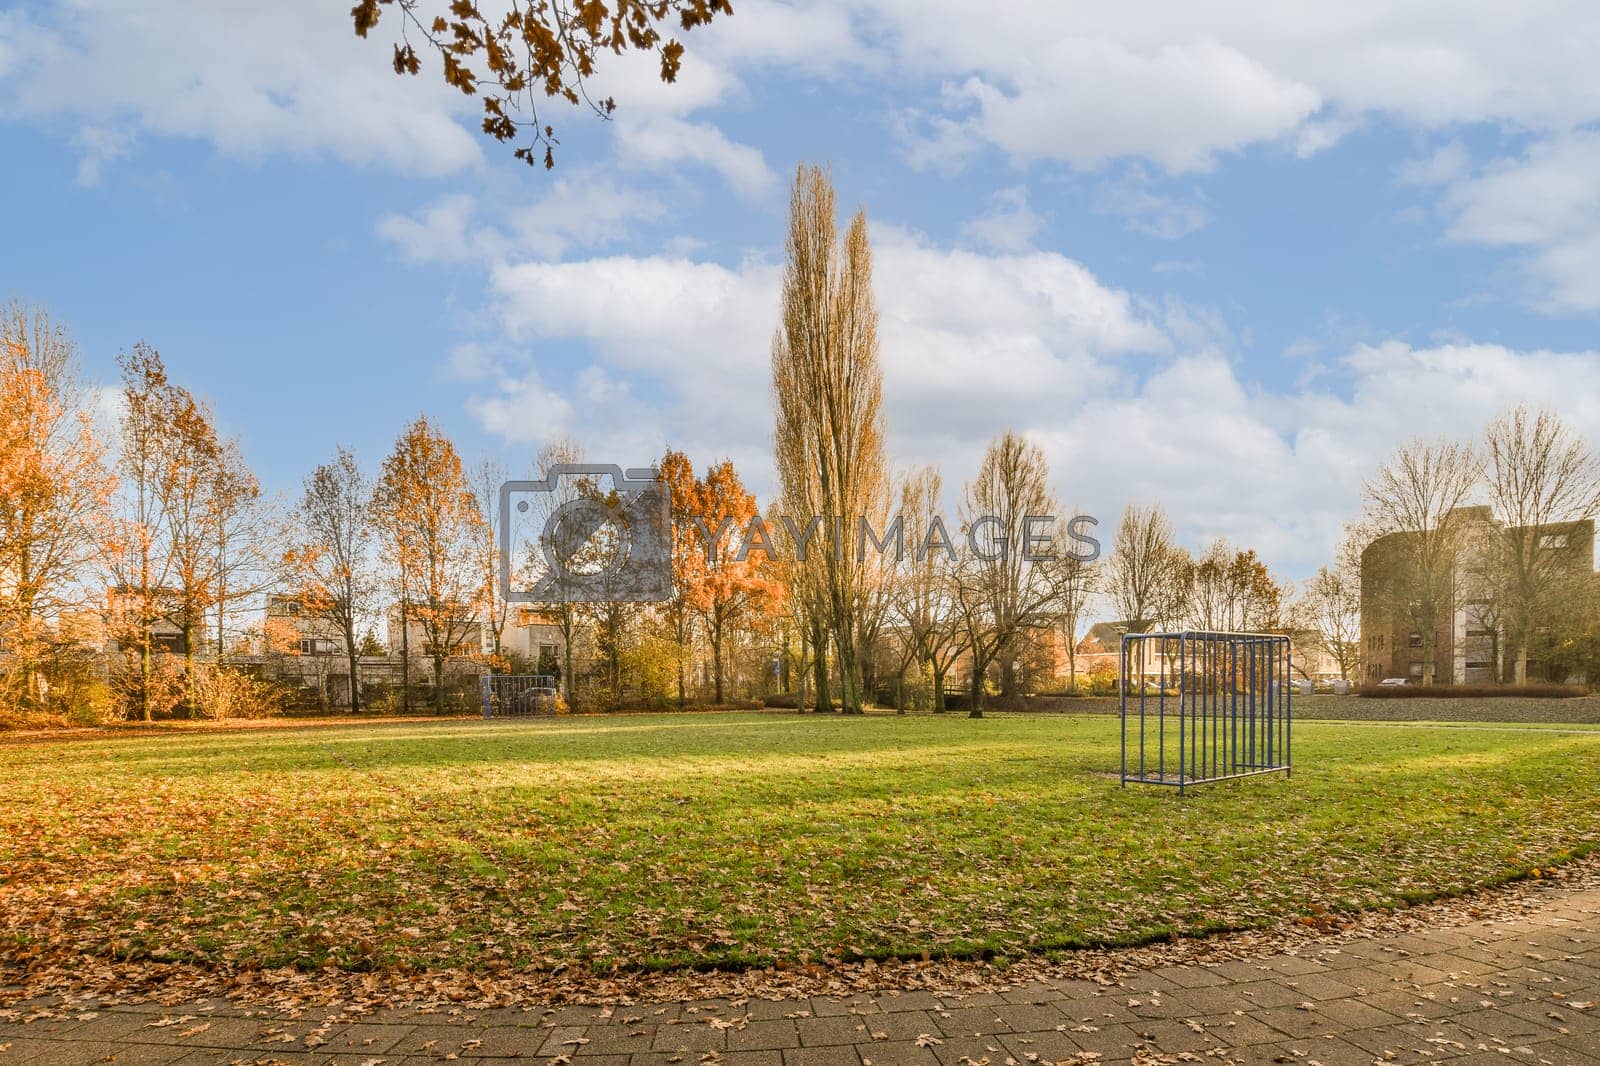 Royalty free image of a park with a soccer field and trees by casamedia